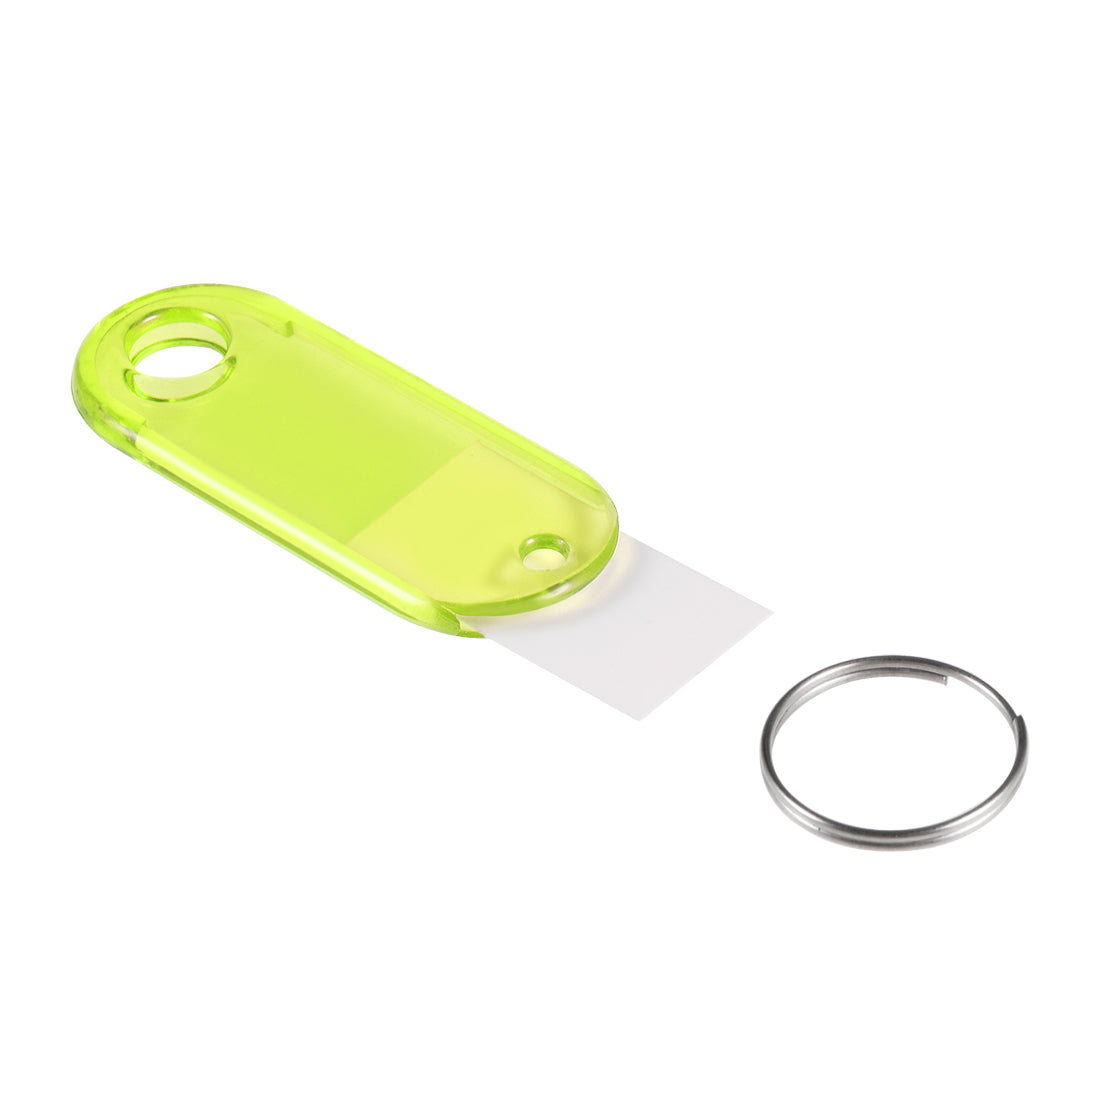 uxcell Uxcell 20pcs of Plastic Key Tags with Split Ring Keychain ID Luggage Label Window